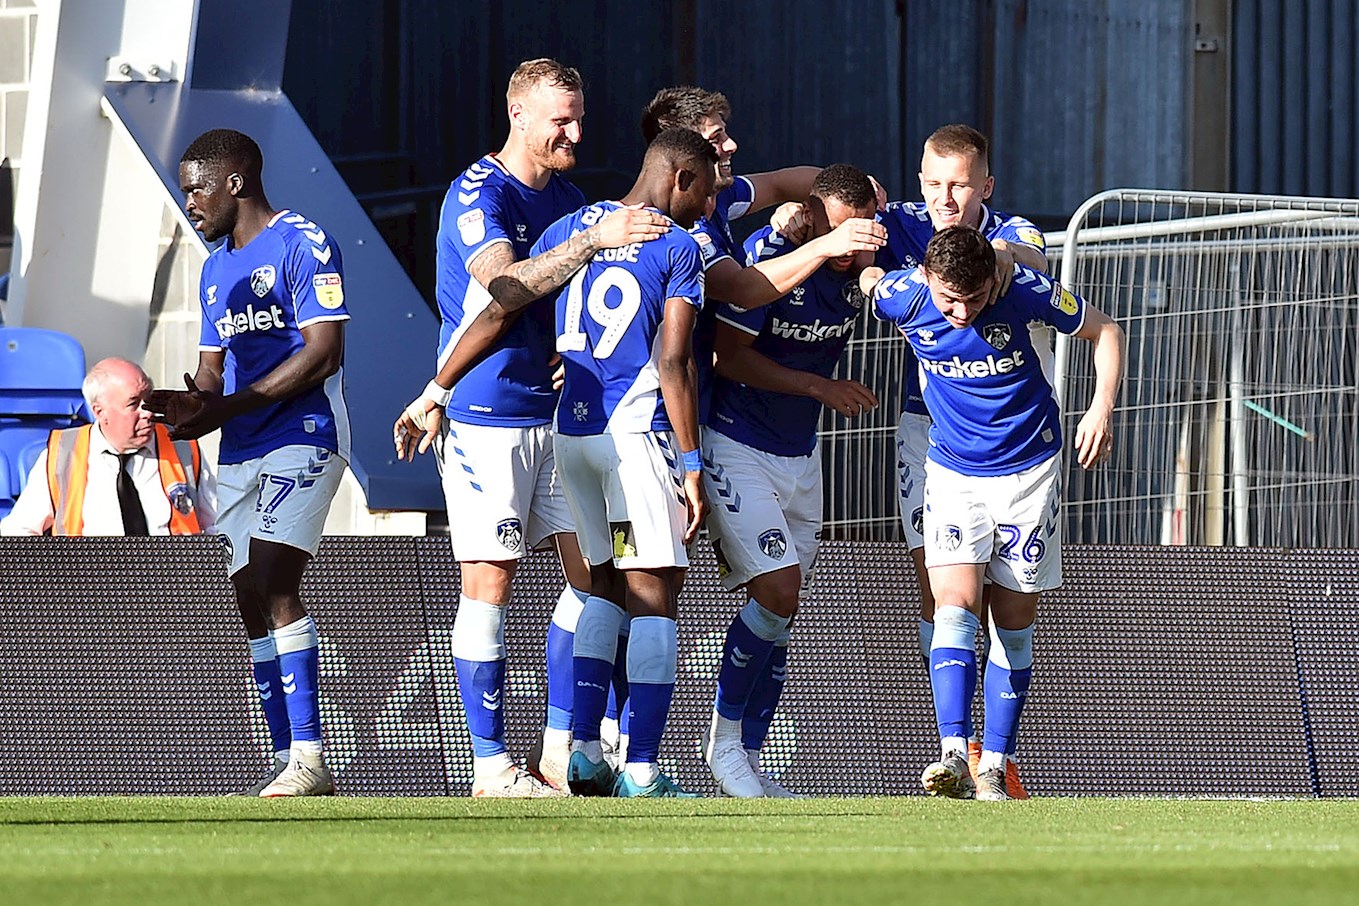 MATCH HIGHLIGHTS: Oldham Athletic 3-1 Morecambe - News - Oldham Athletic